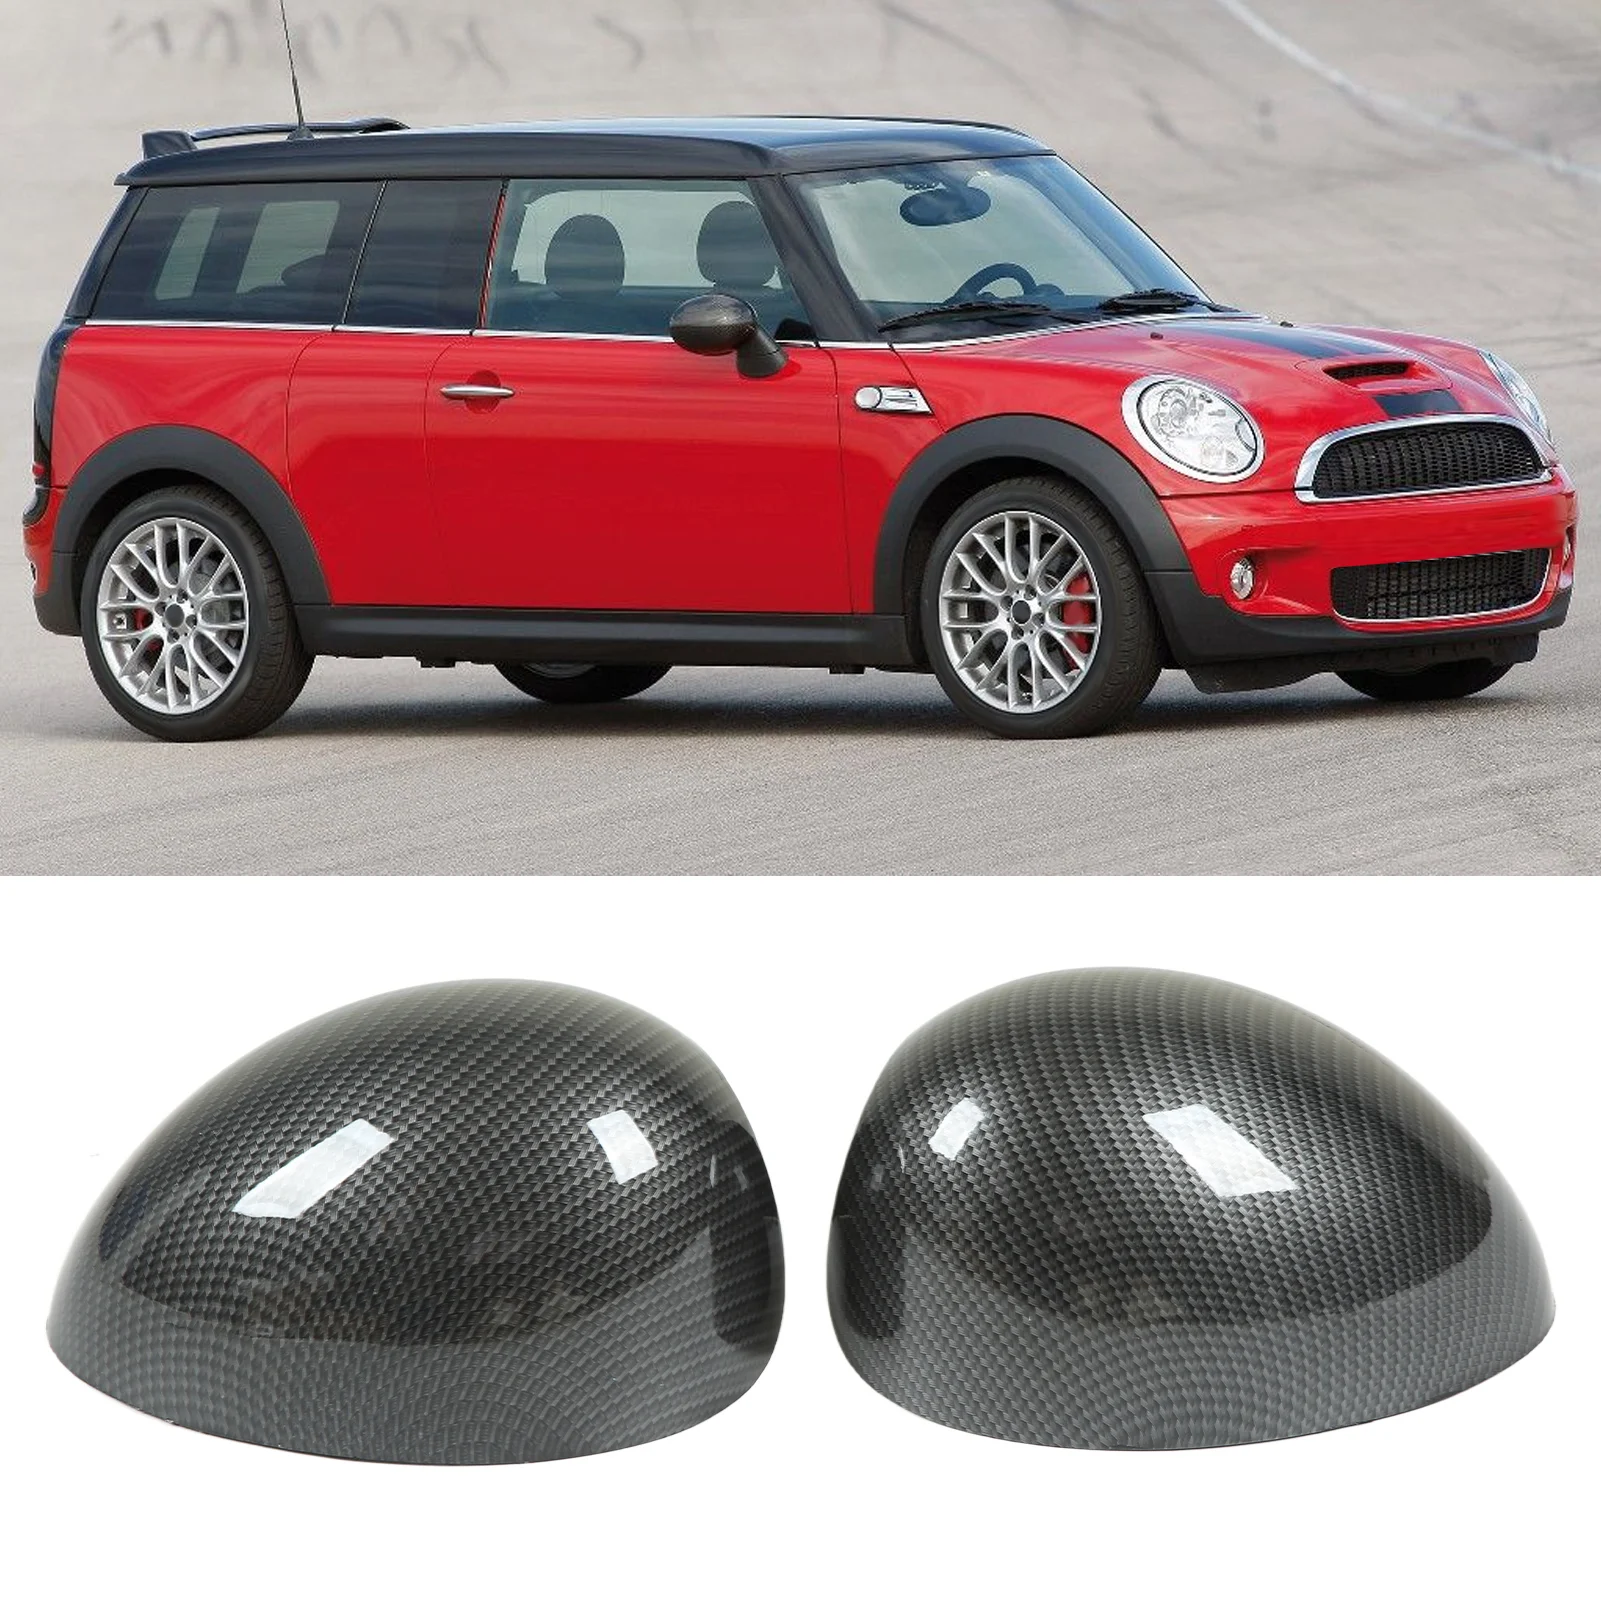 

2 Pcs Car Door Side Rearview Mirror Cover Cap ABS Carbon Fiber Left Right Wing Cover For Mini Cooper R55 R56 R57 R58 R59 R60 R61